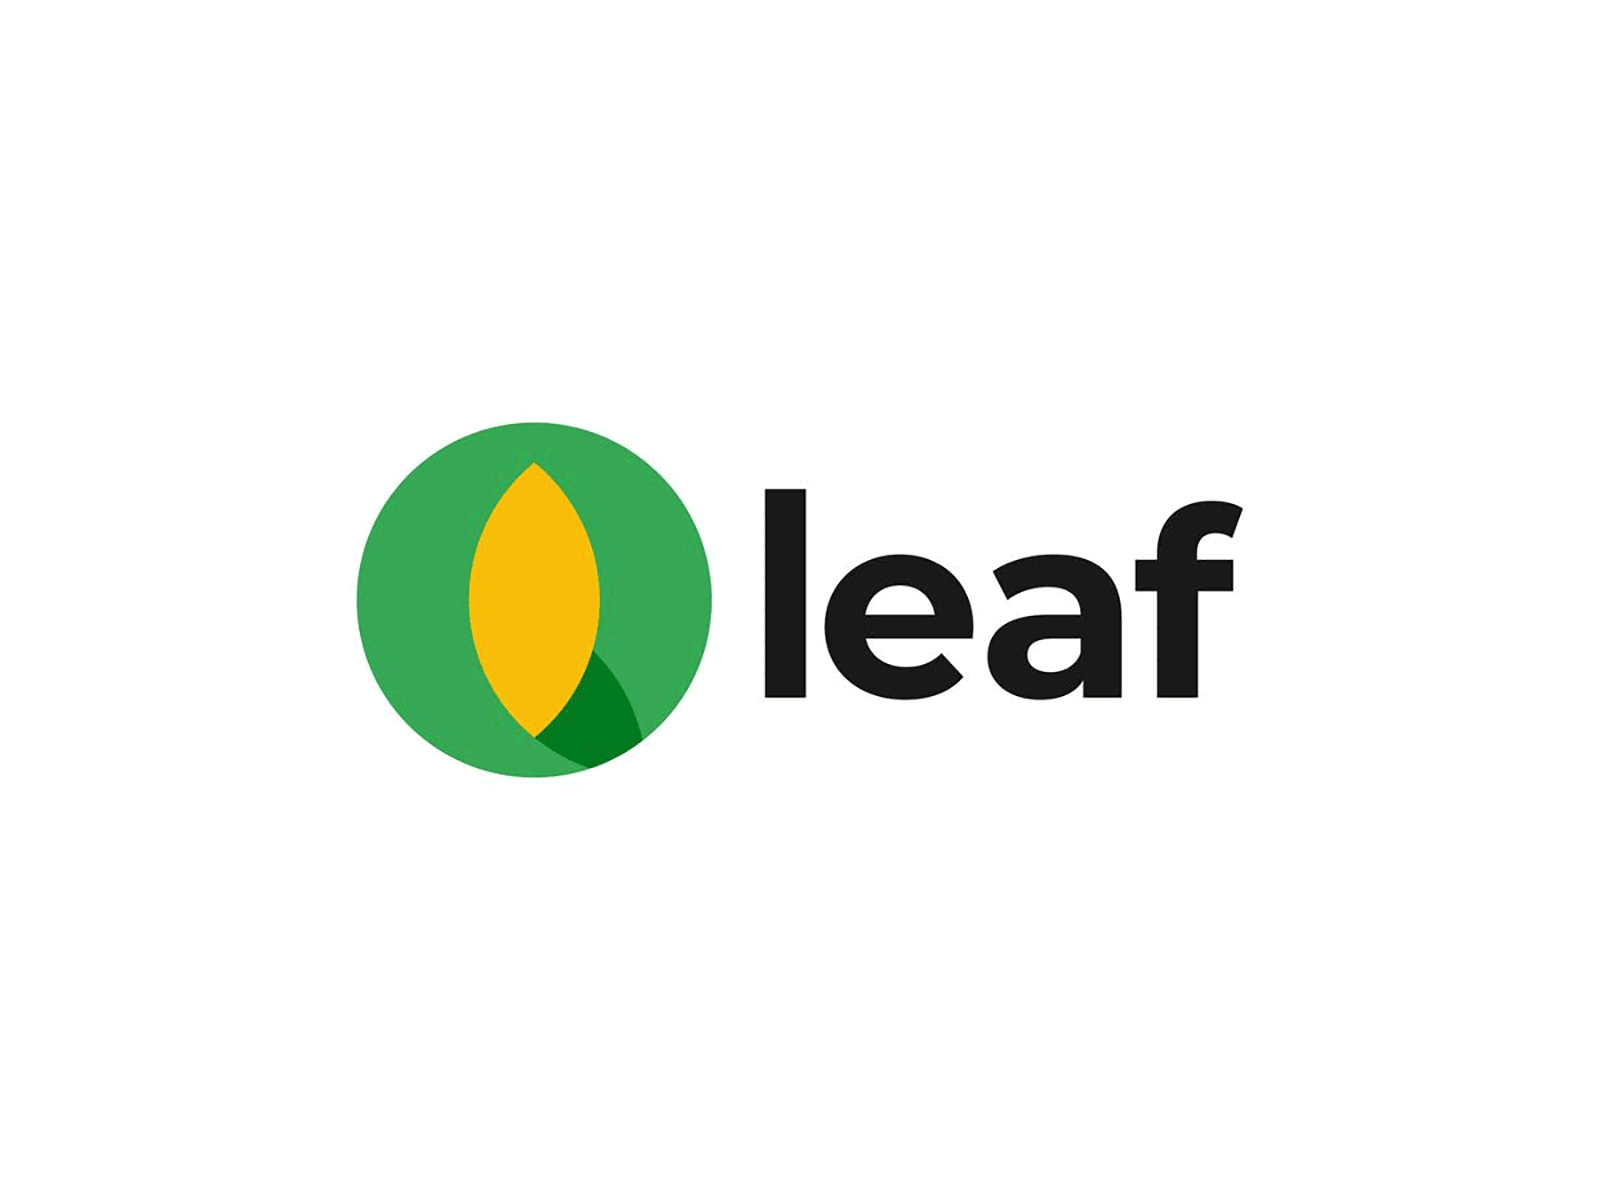 leaf-logo-branding-concept-by-themajhar-s-on-dribbble